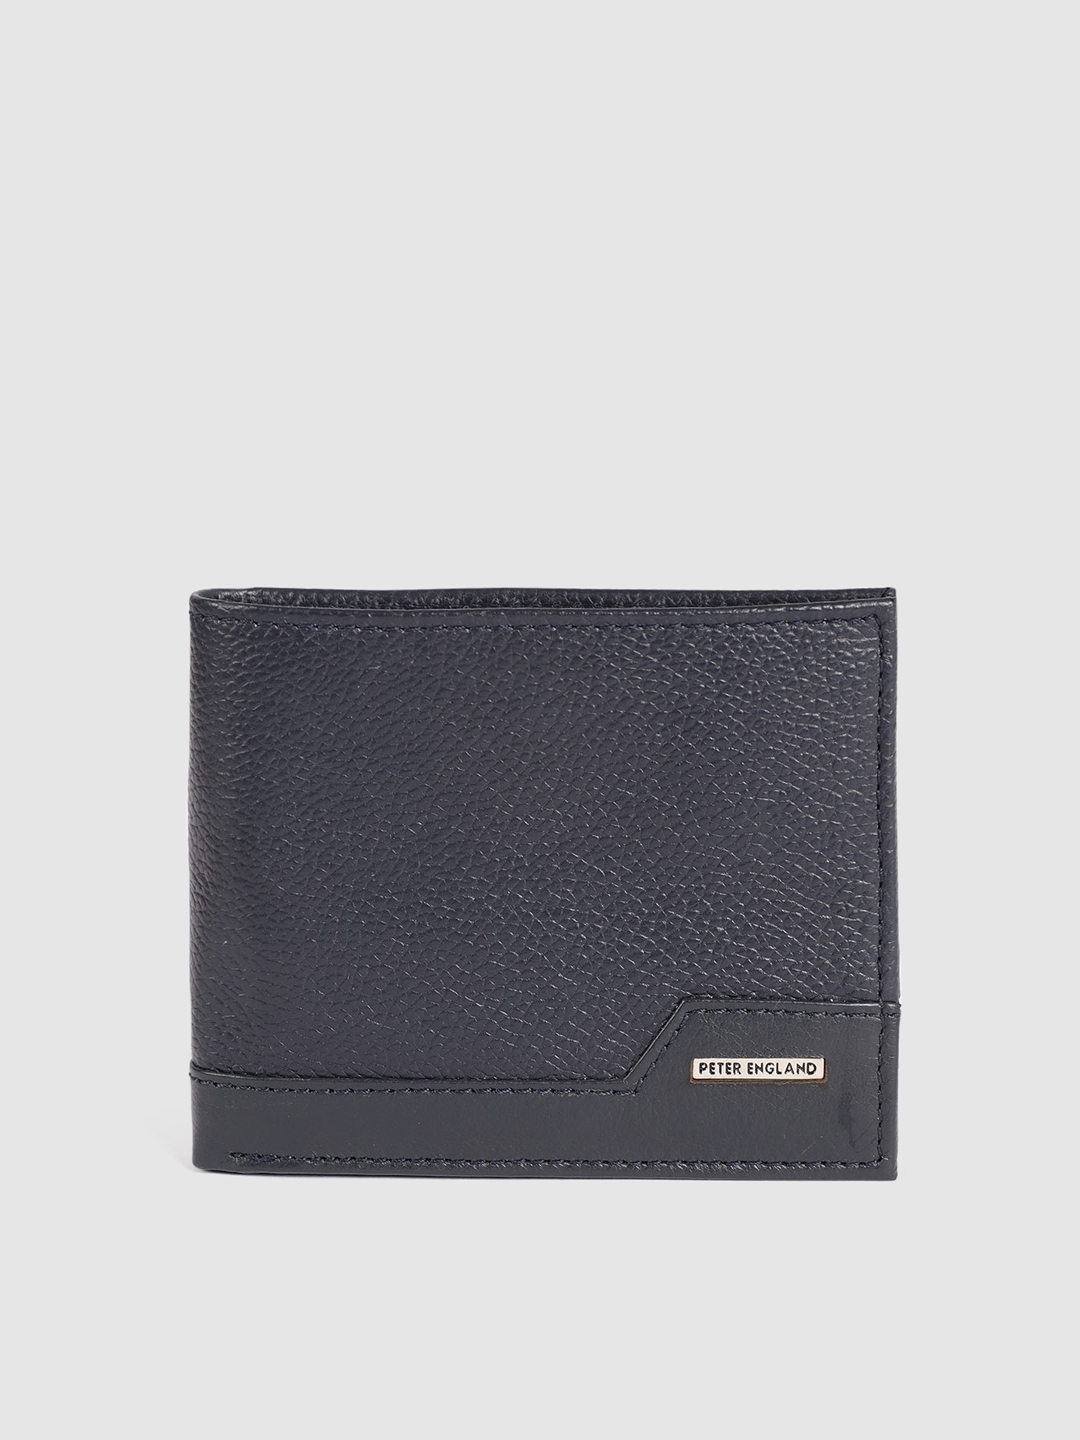 Peter England Men Navy Blue Textured Leather Two Fold Wallet